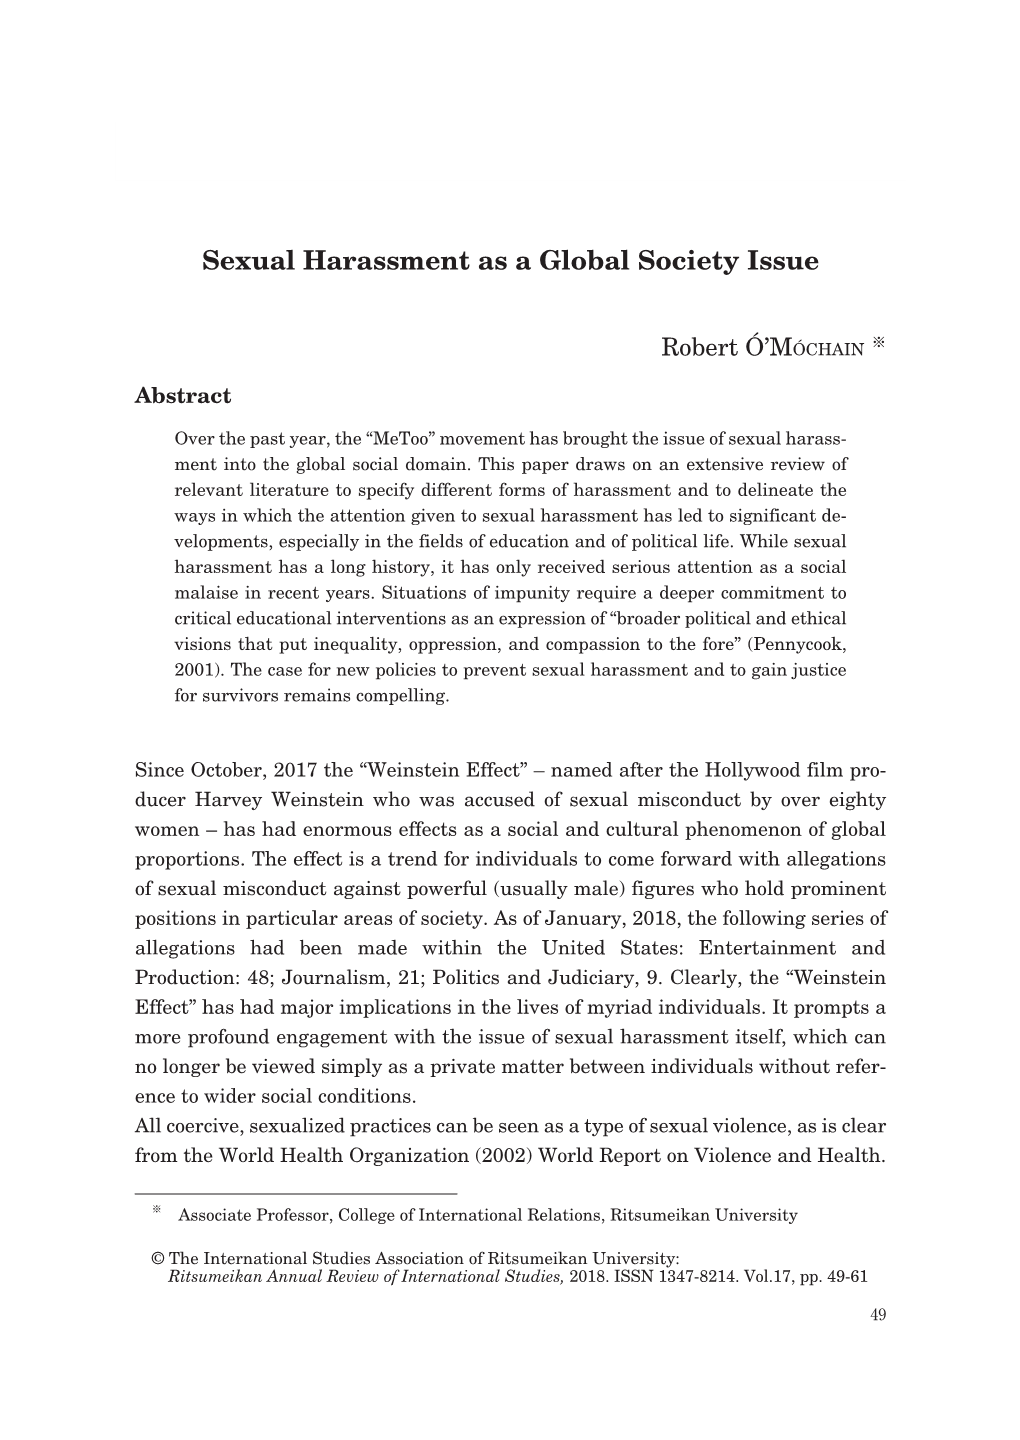 Sexual Harassment As a Global Society Issue